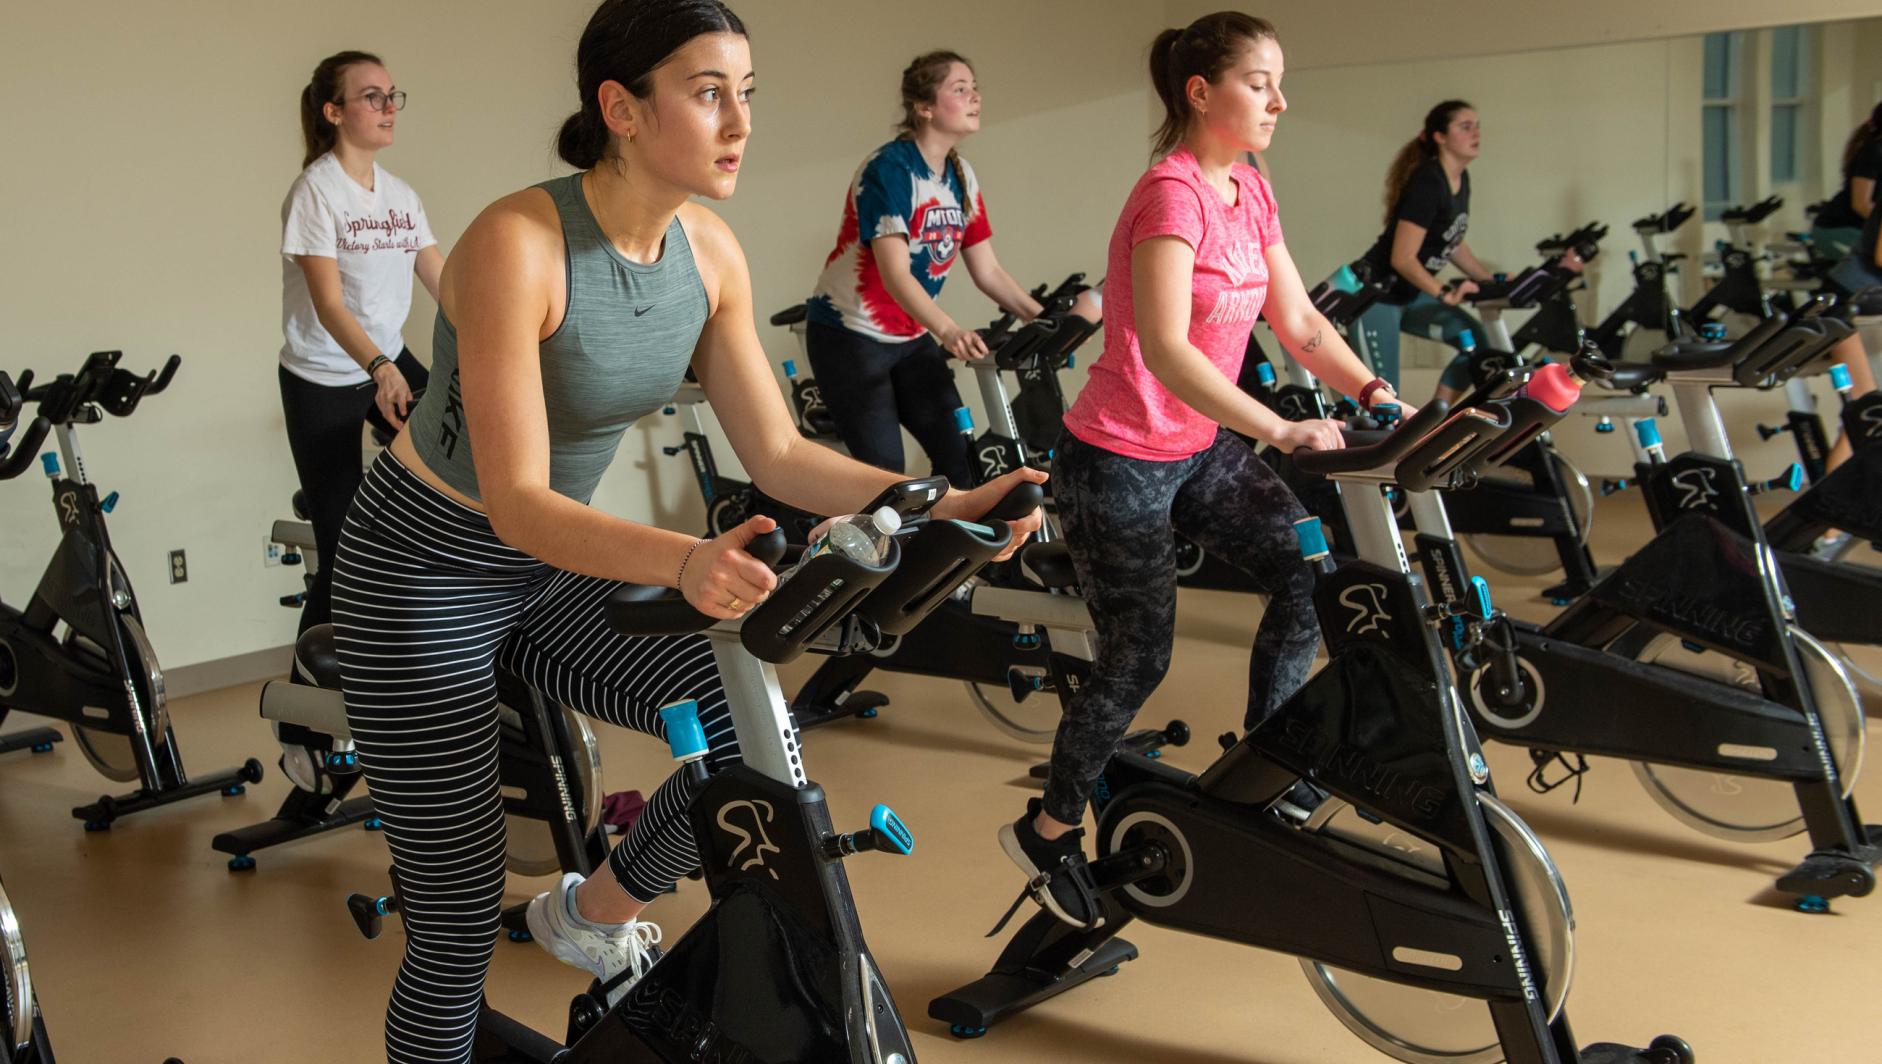 Springfield College students workout during a spin class in the Wellness Center on Thursday, March 10, 2022.